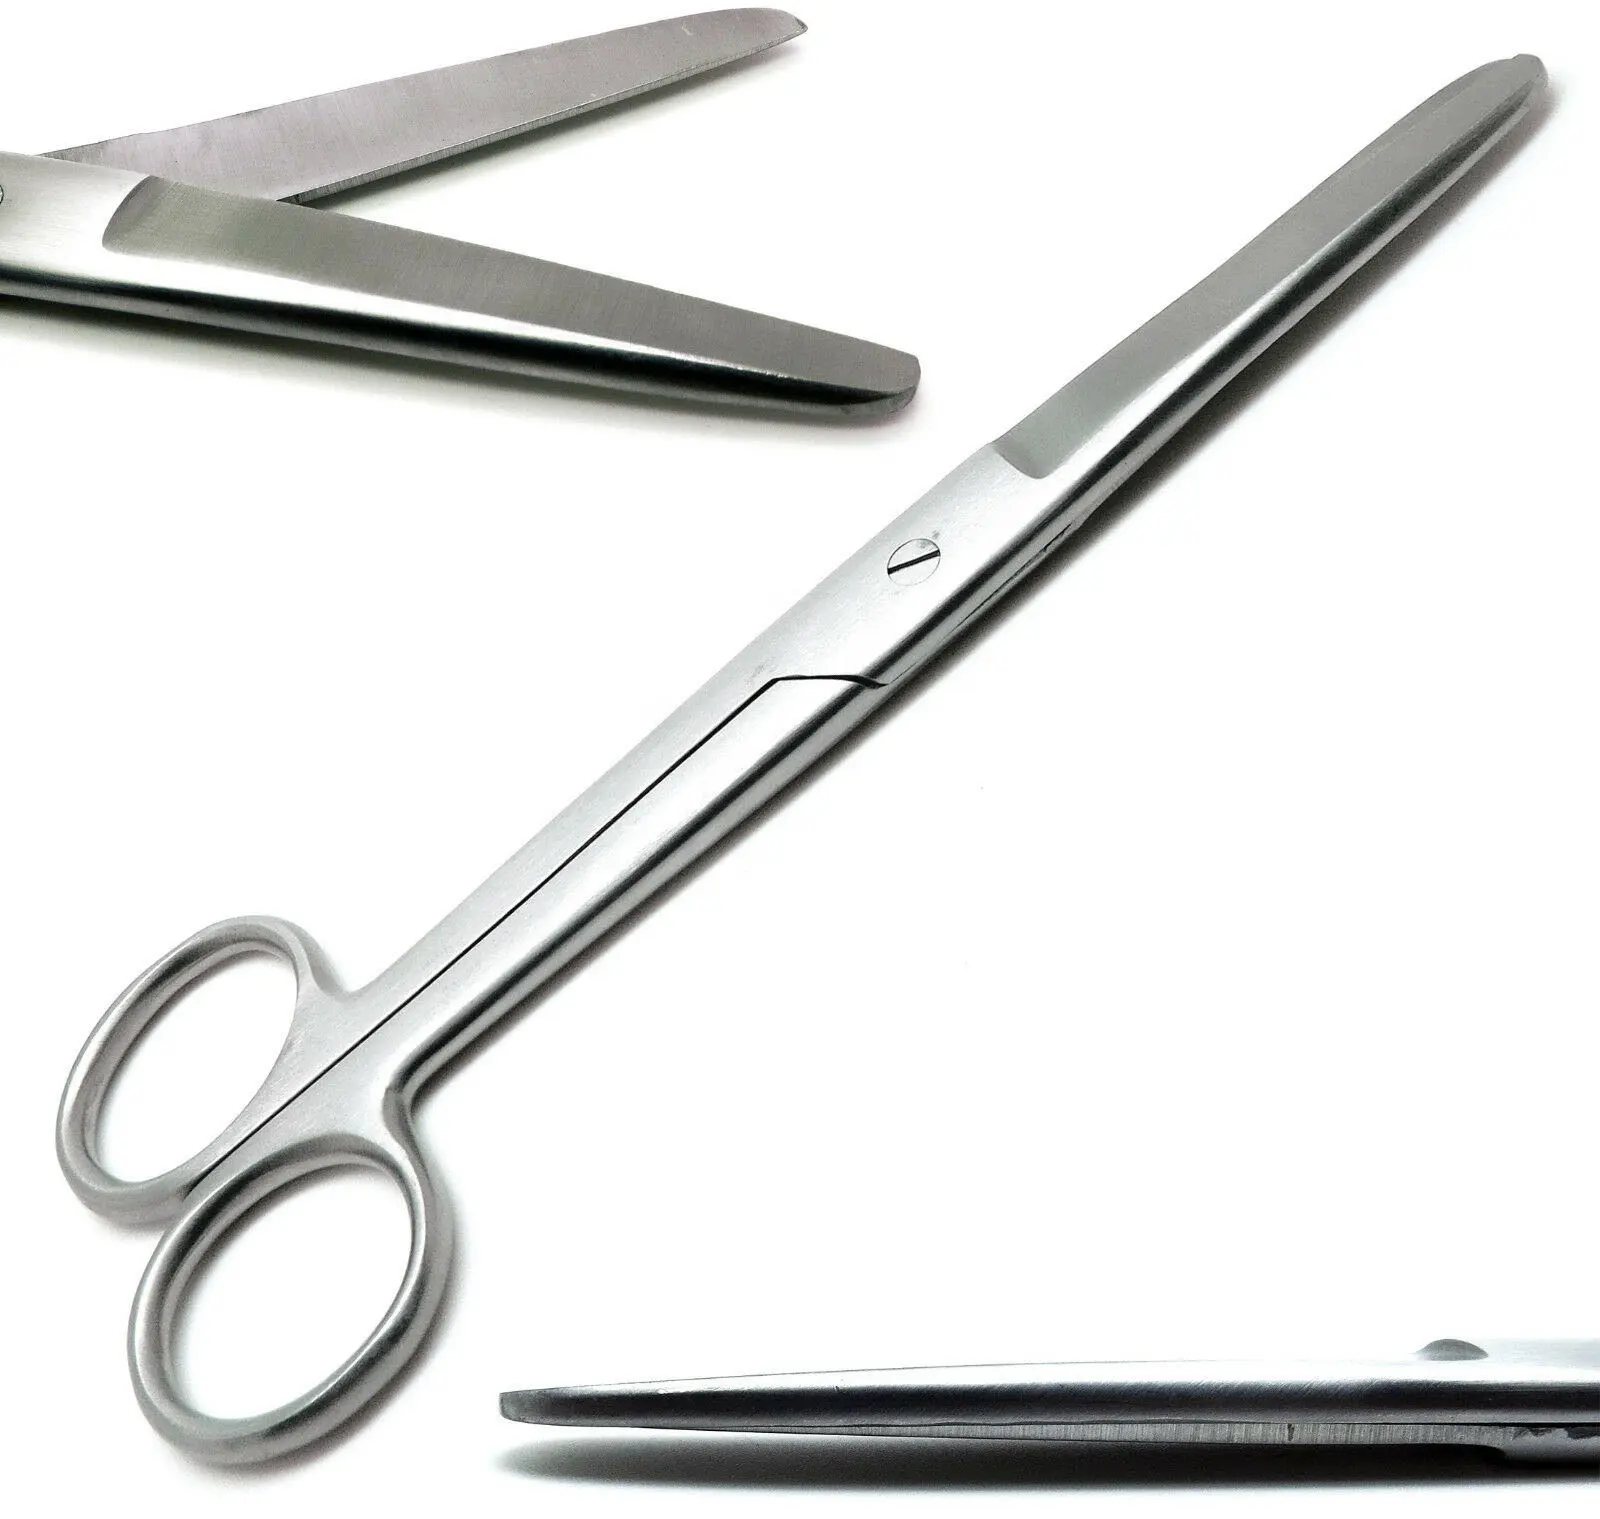 Mayo Dissecting Supercut Scissors 6.75" Surgical Straight Blunt/Blunt Tools Stainless Steel Dental Surgical - WeCare Surgical